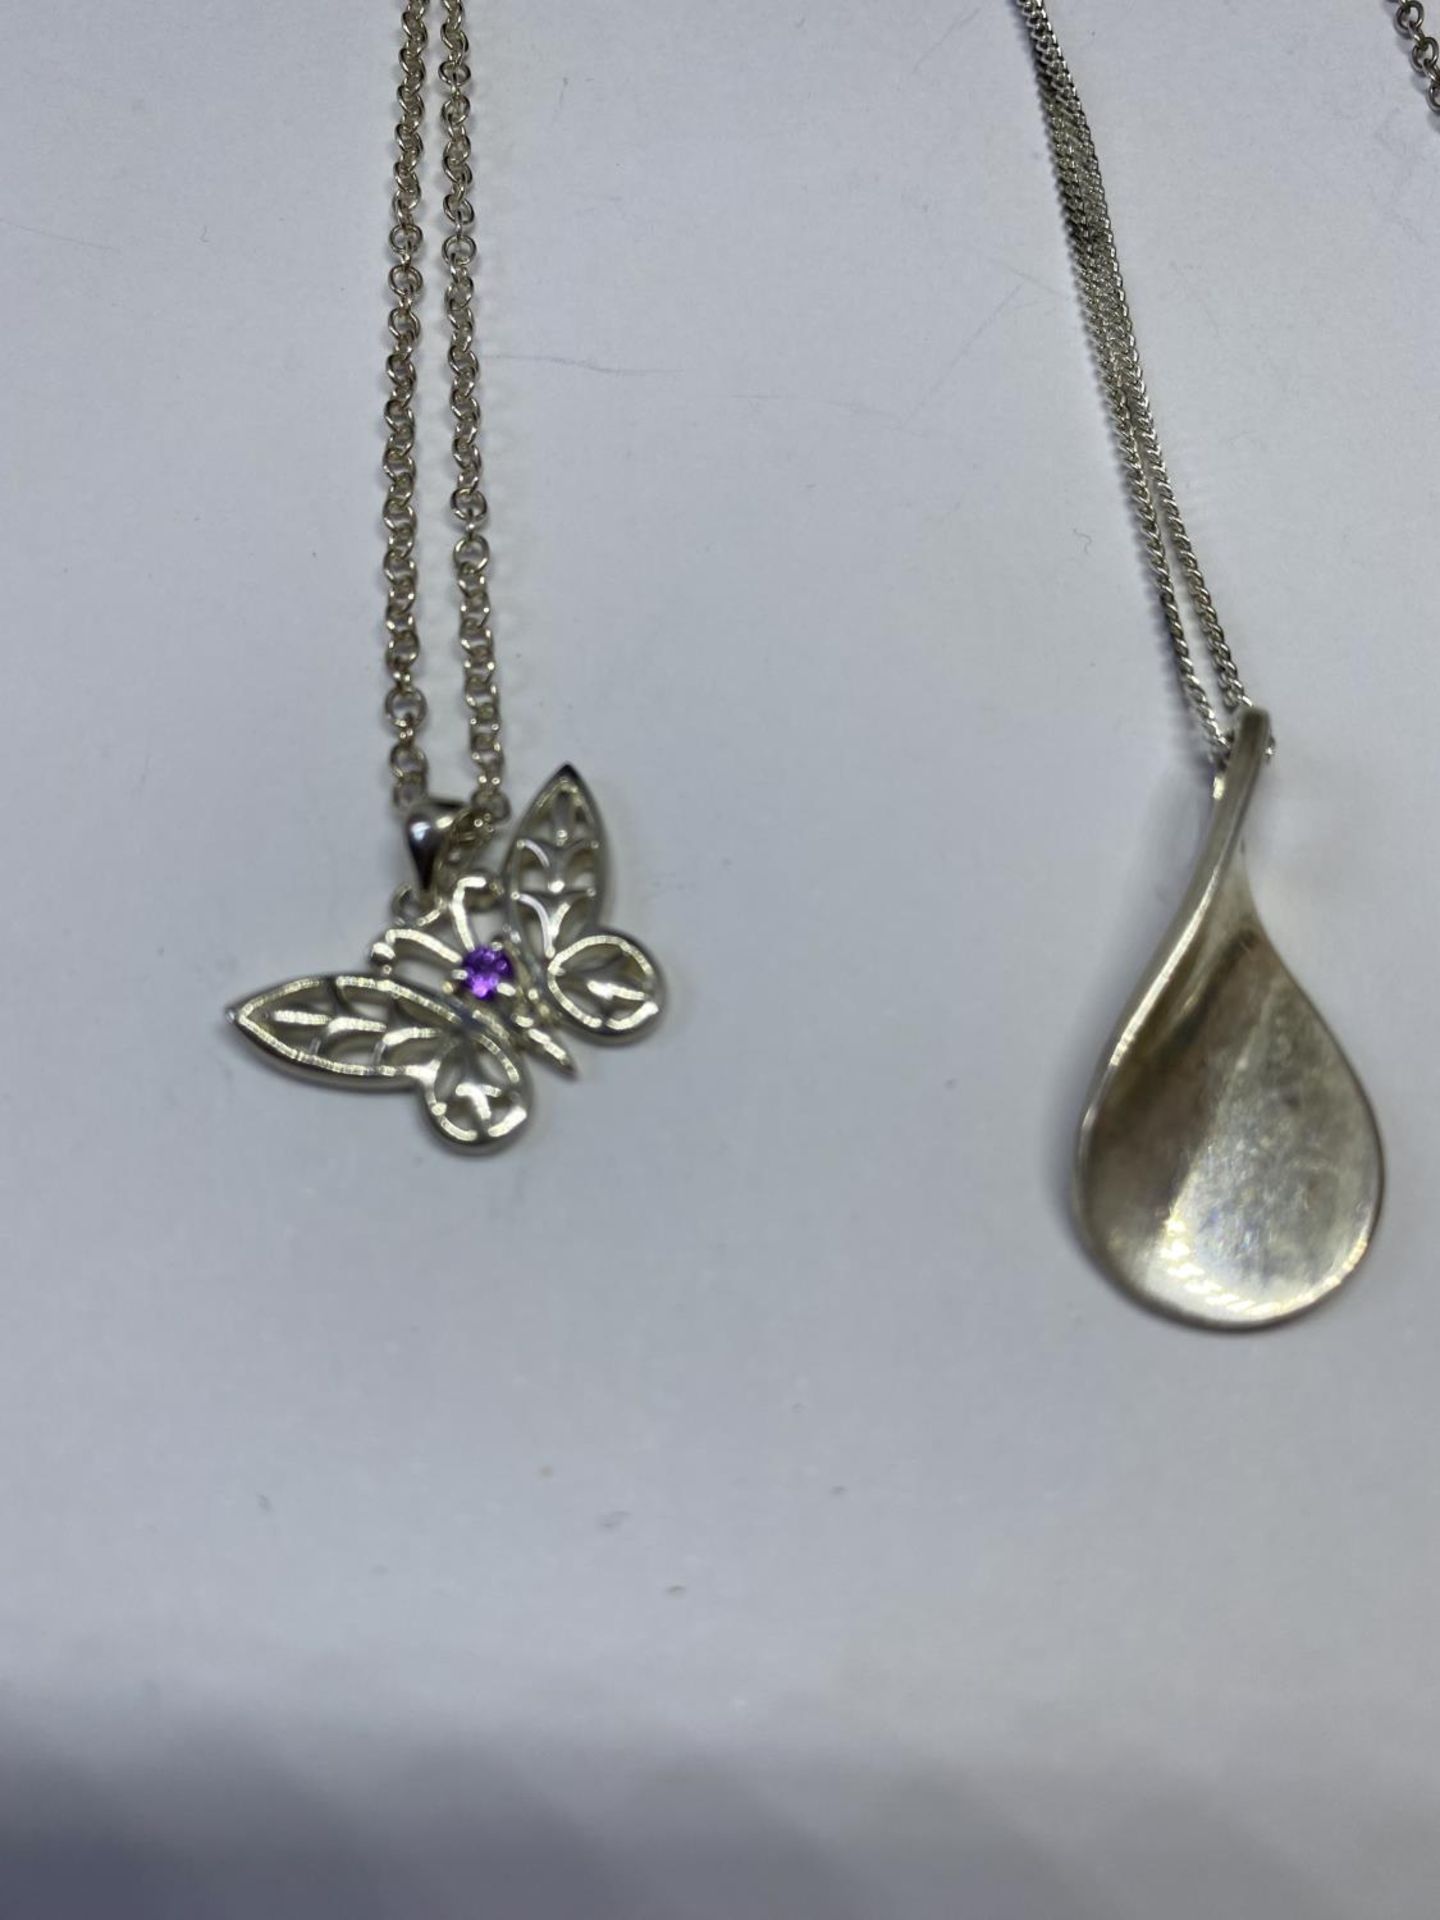 FOUR SILVER NECKLACES WITH PENDANTS - Image 2 of 3